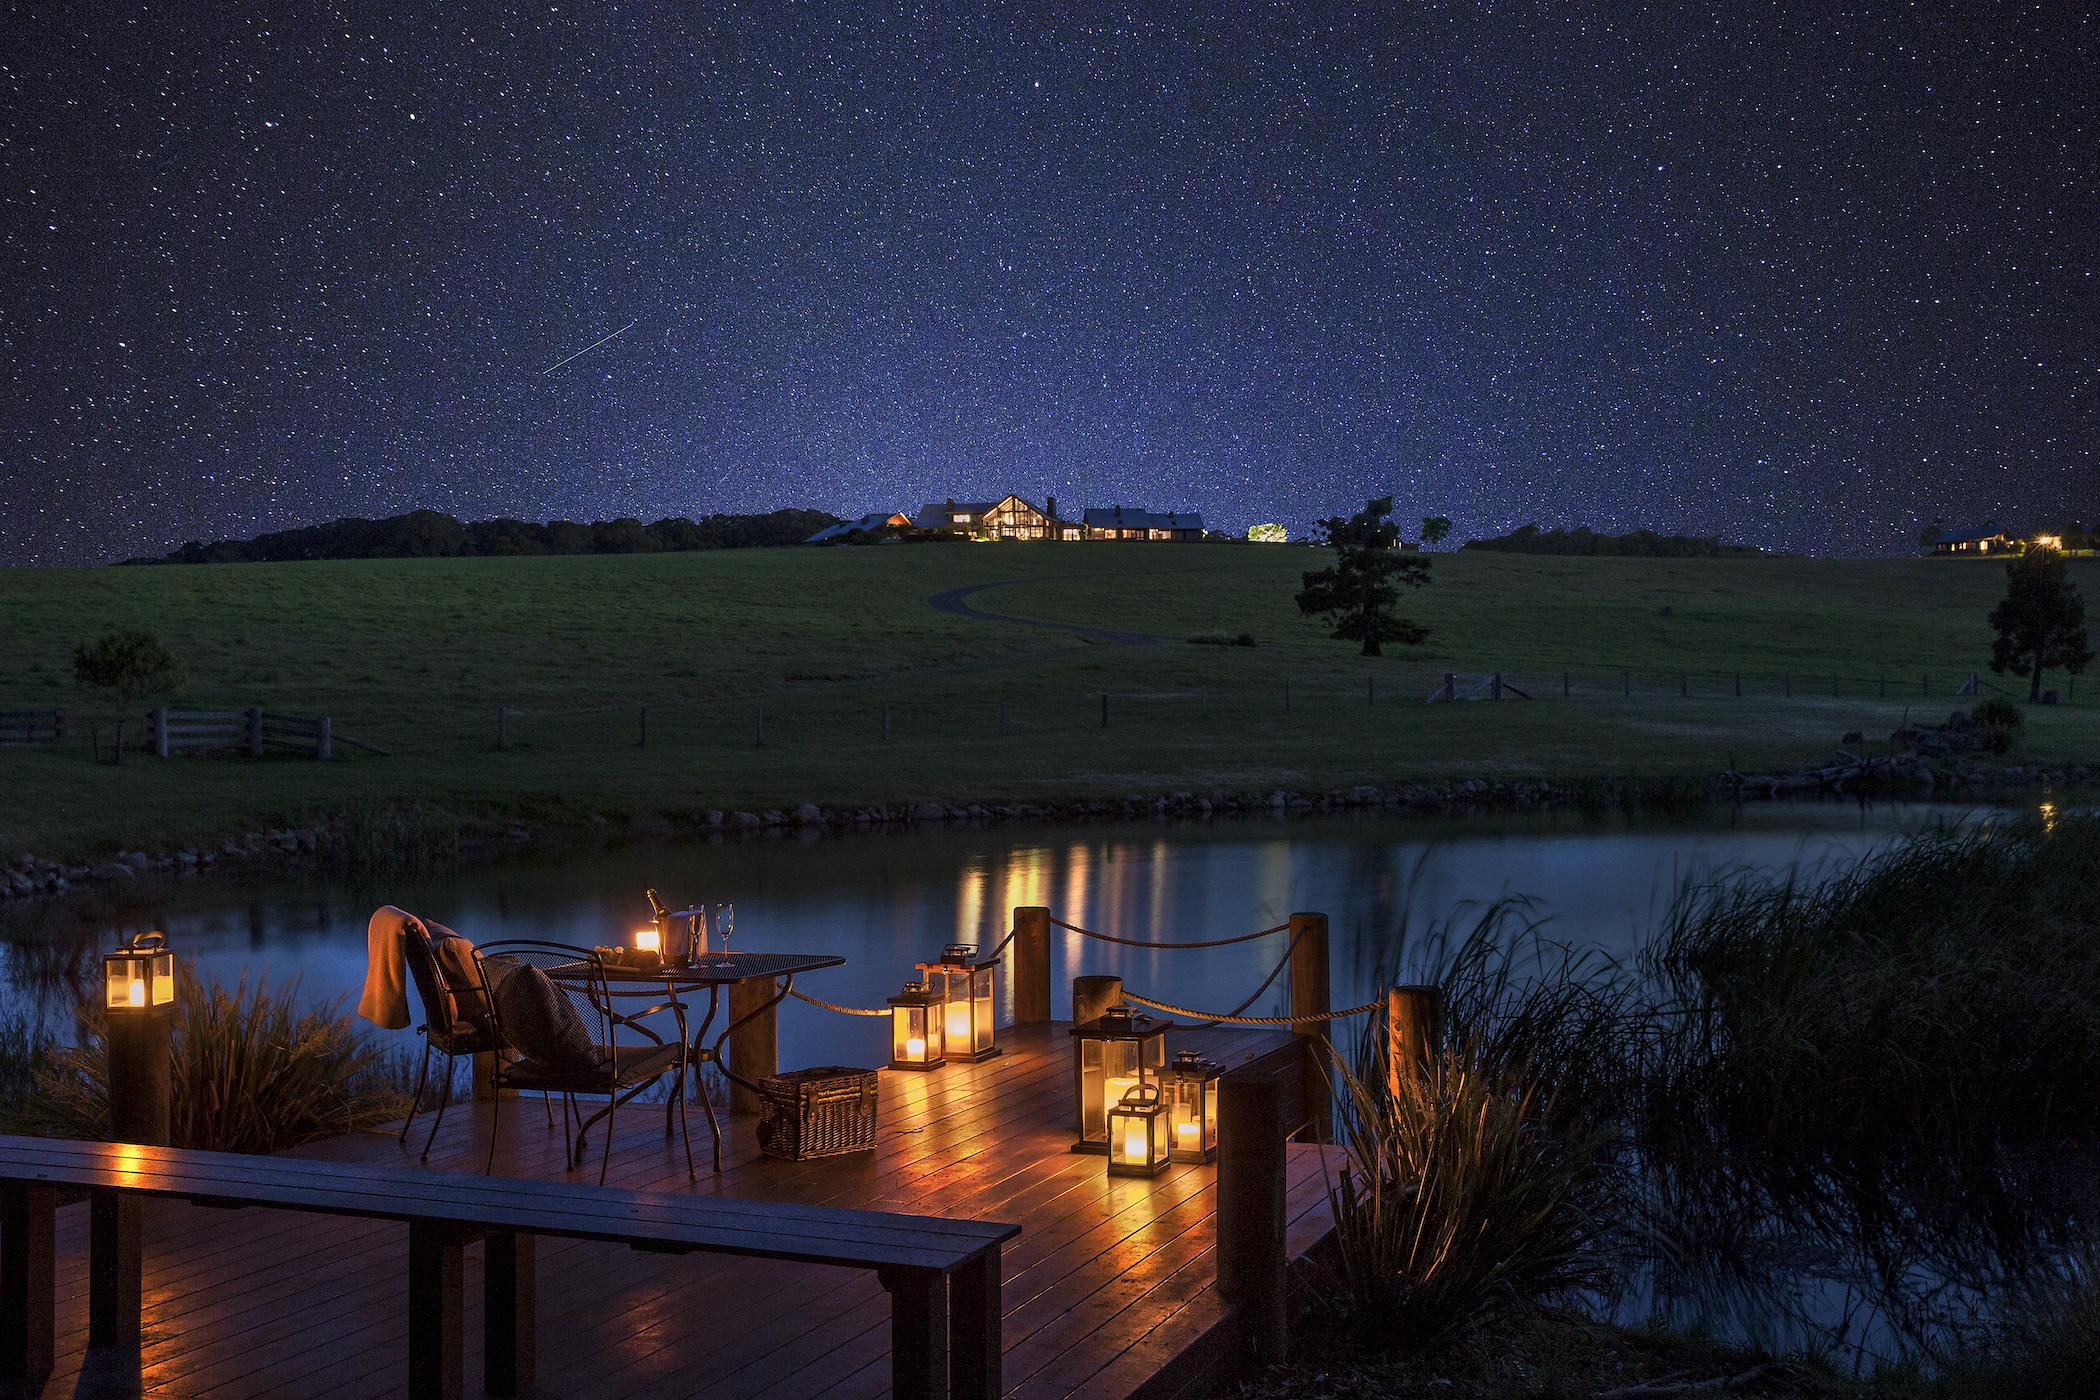 Stars shining in the night sky at Spicers Peak Lodge